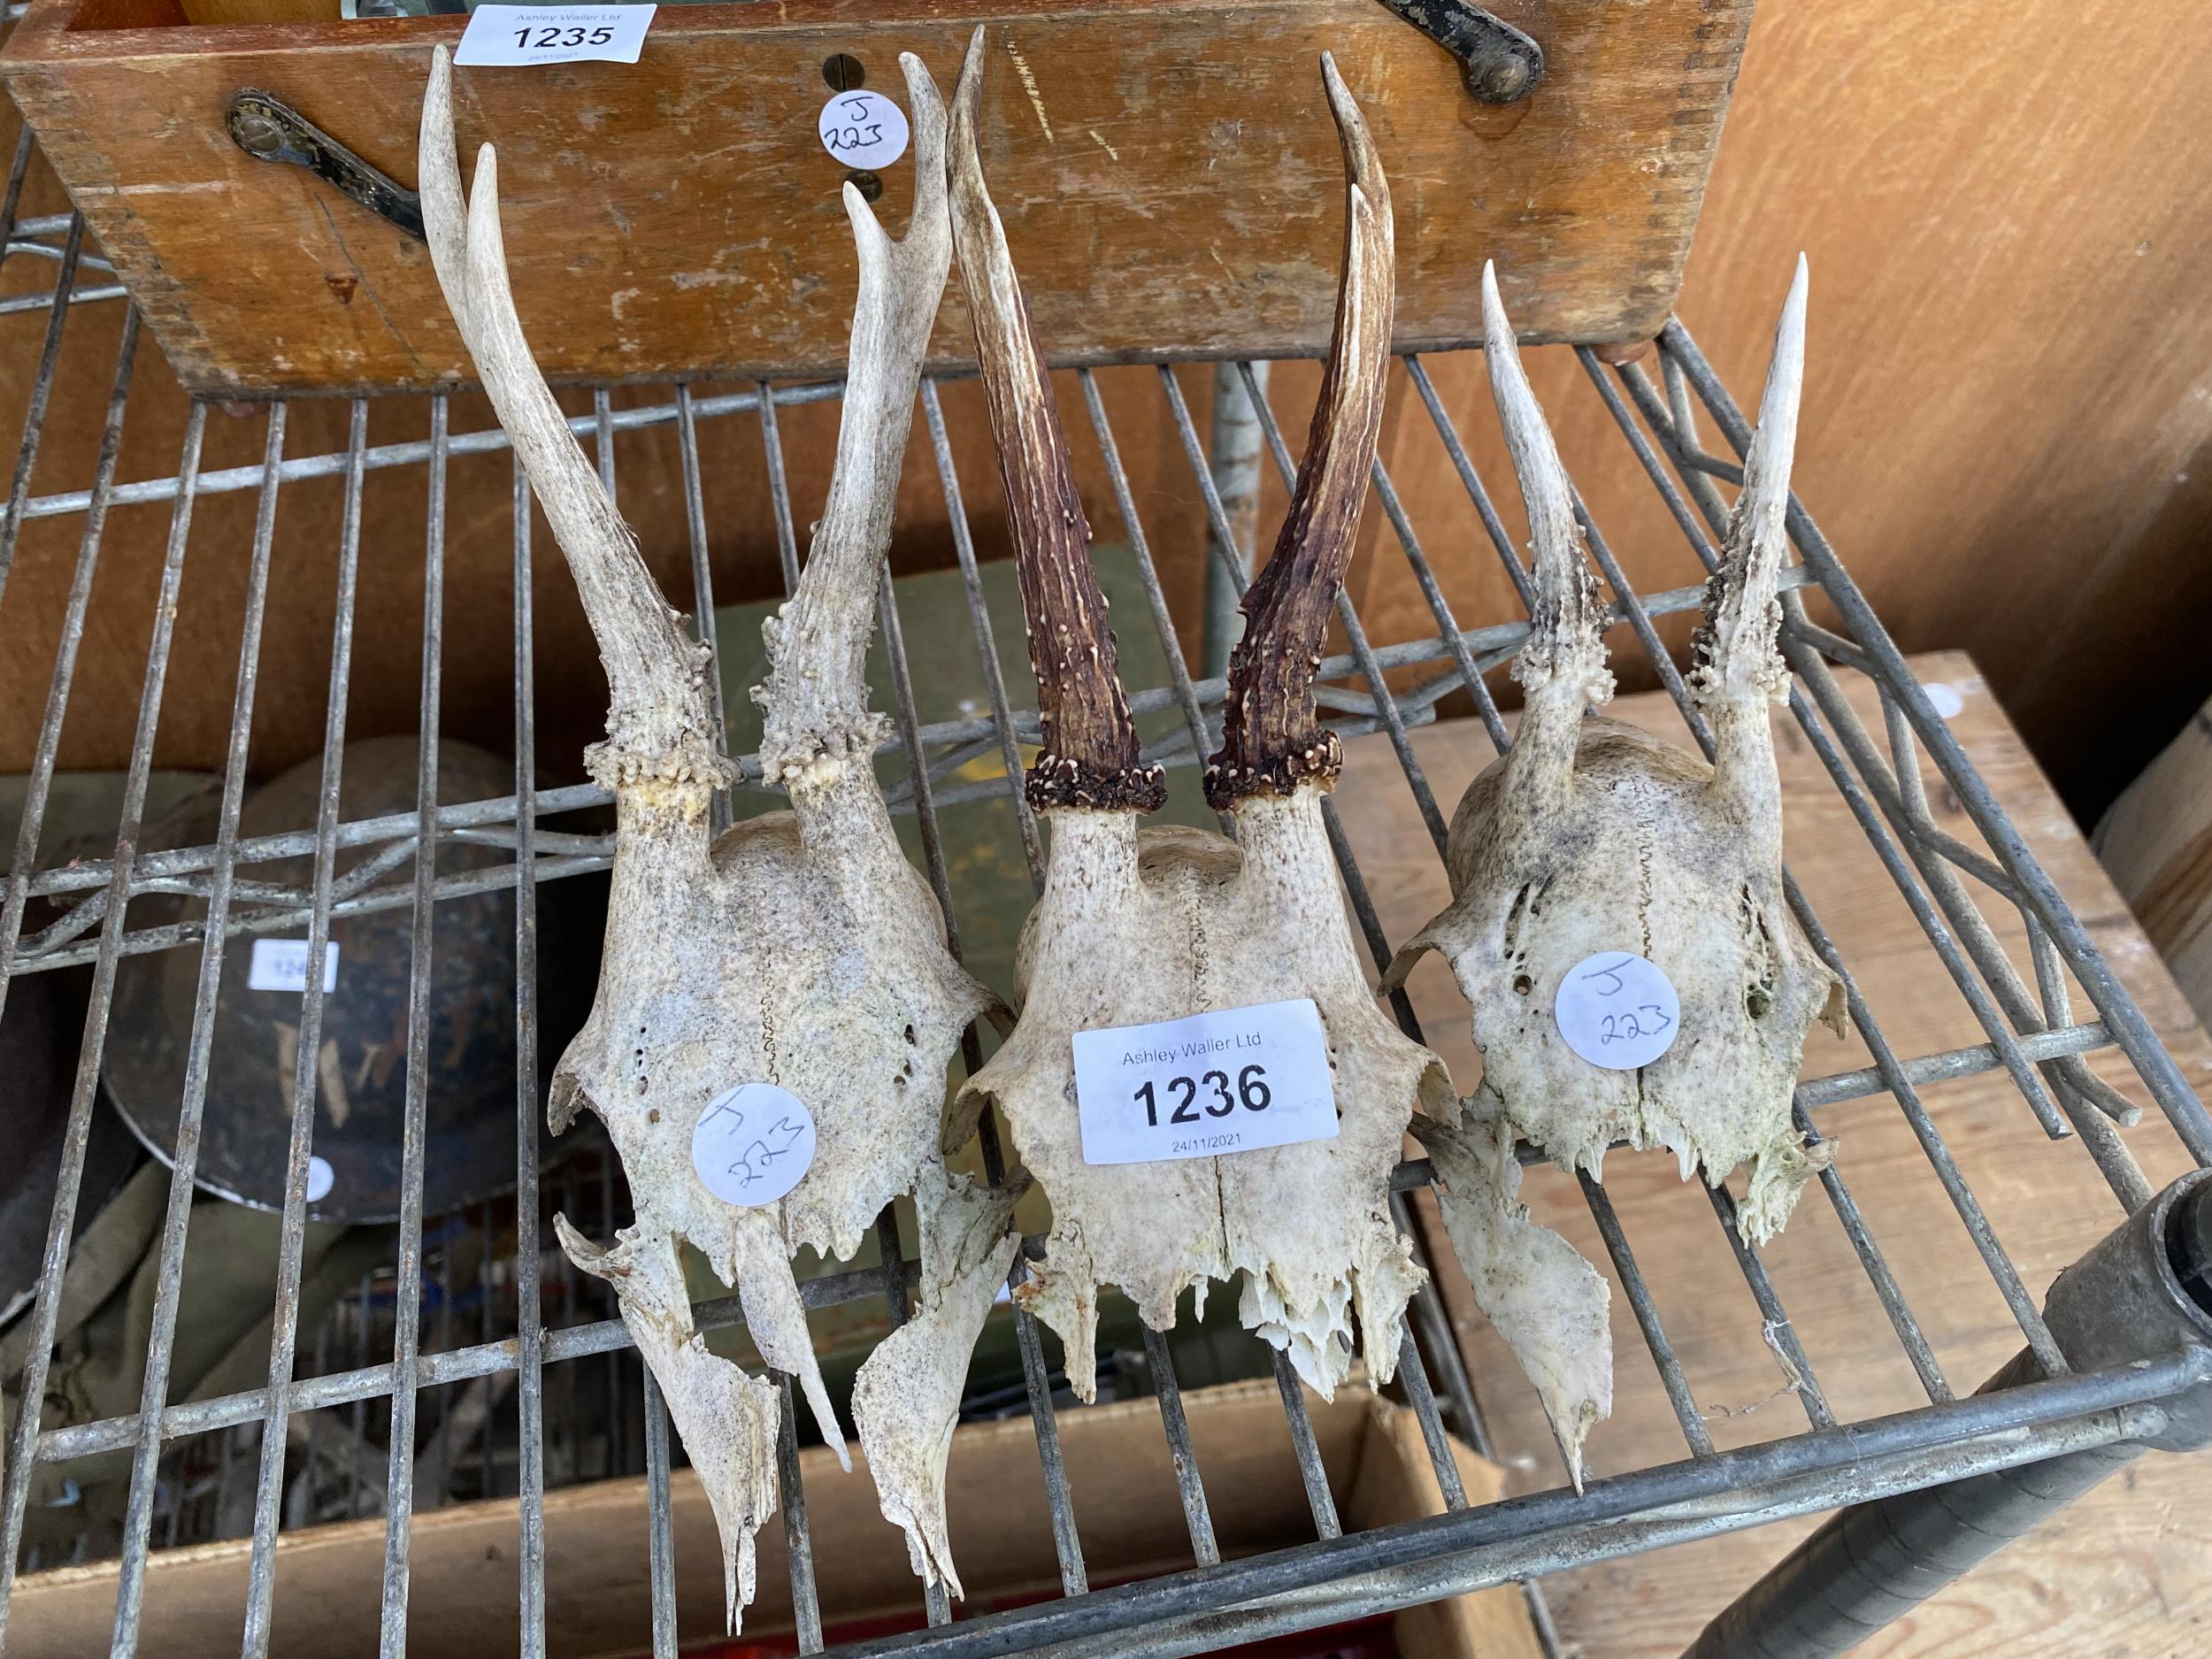 A GROYUP OF THREE ANIMAL SKULLS WITH ANTELERS